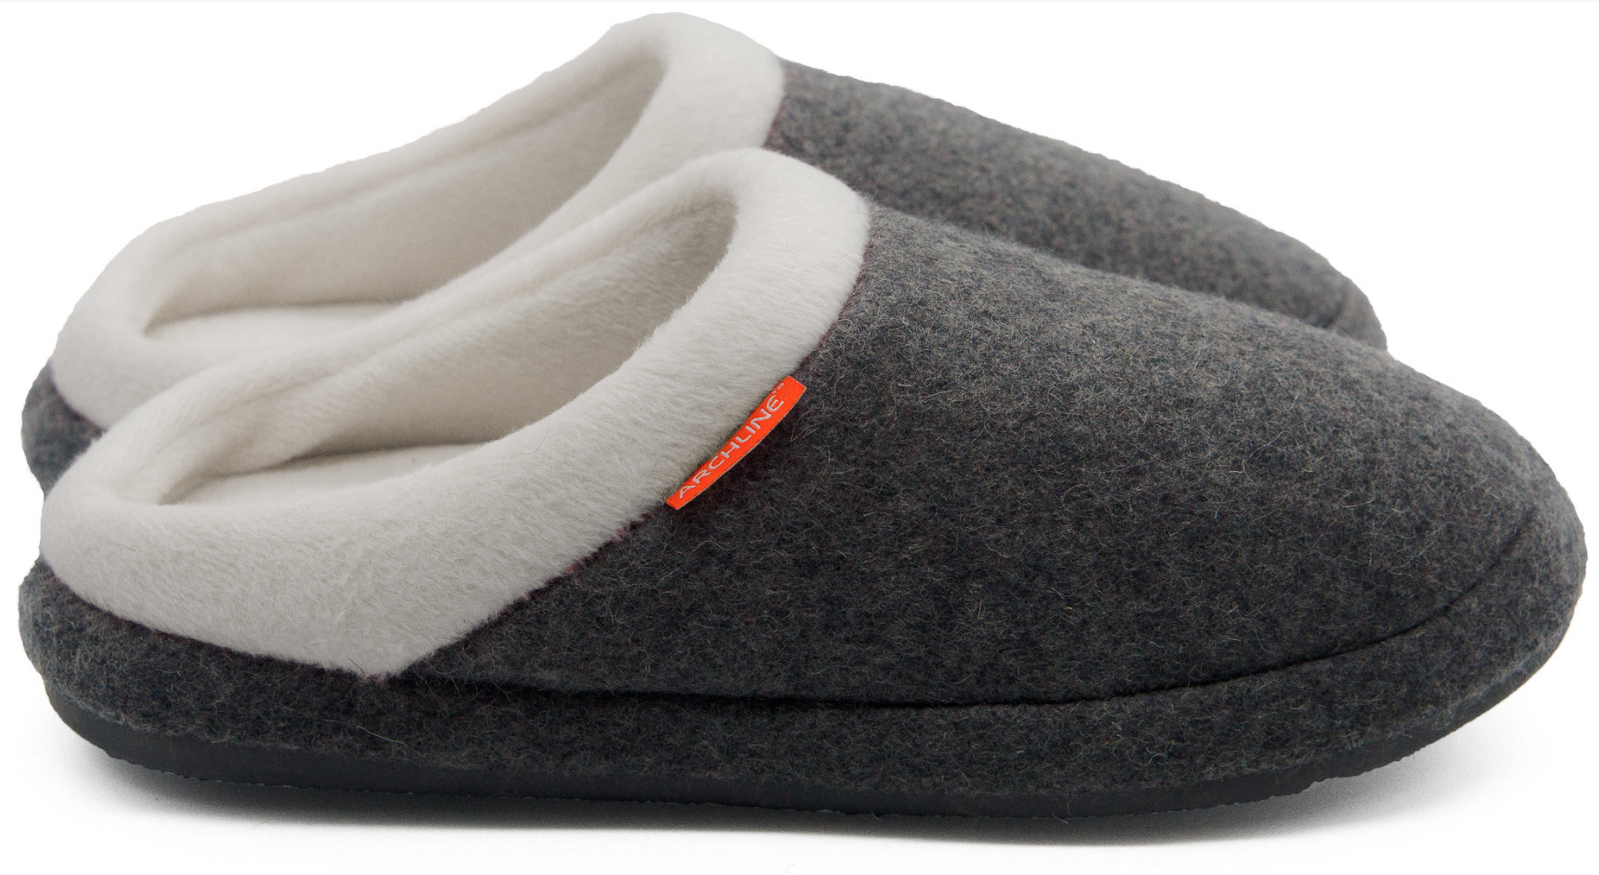 Orthotic Slippers Slip On Arch Scuffs Orthopedic Moccasins - Grey Marle - EUR 42